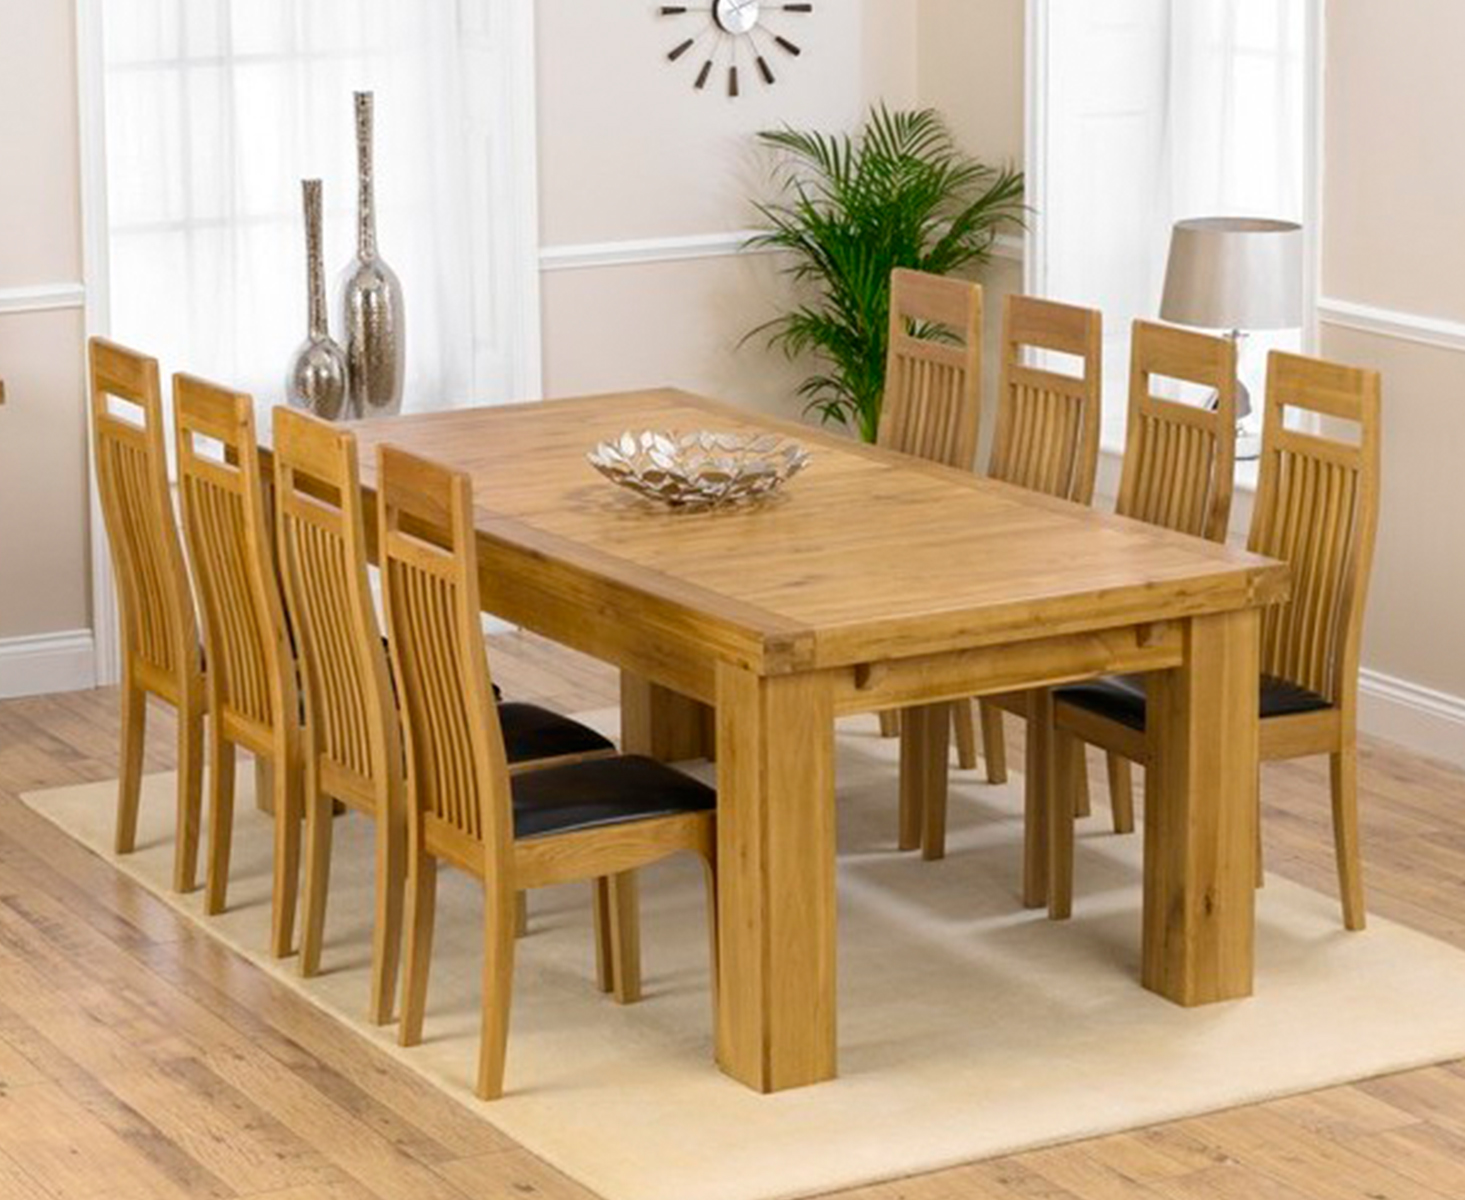 Loire 230cm Solid Oak Extending Dining Table With 6 Cream Monaco Chairs